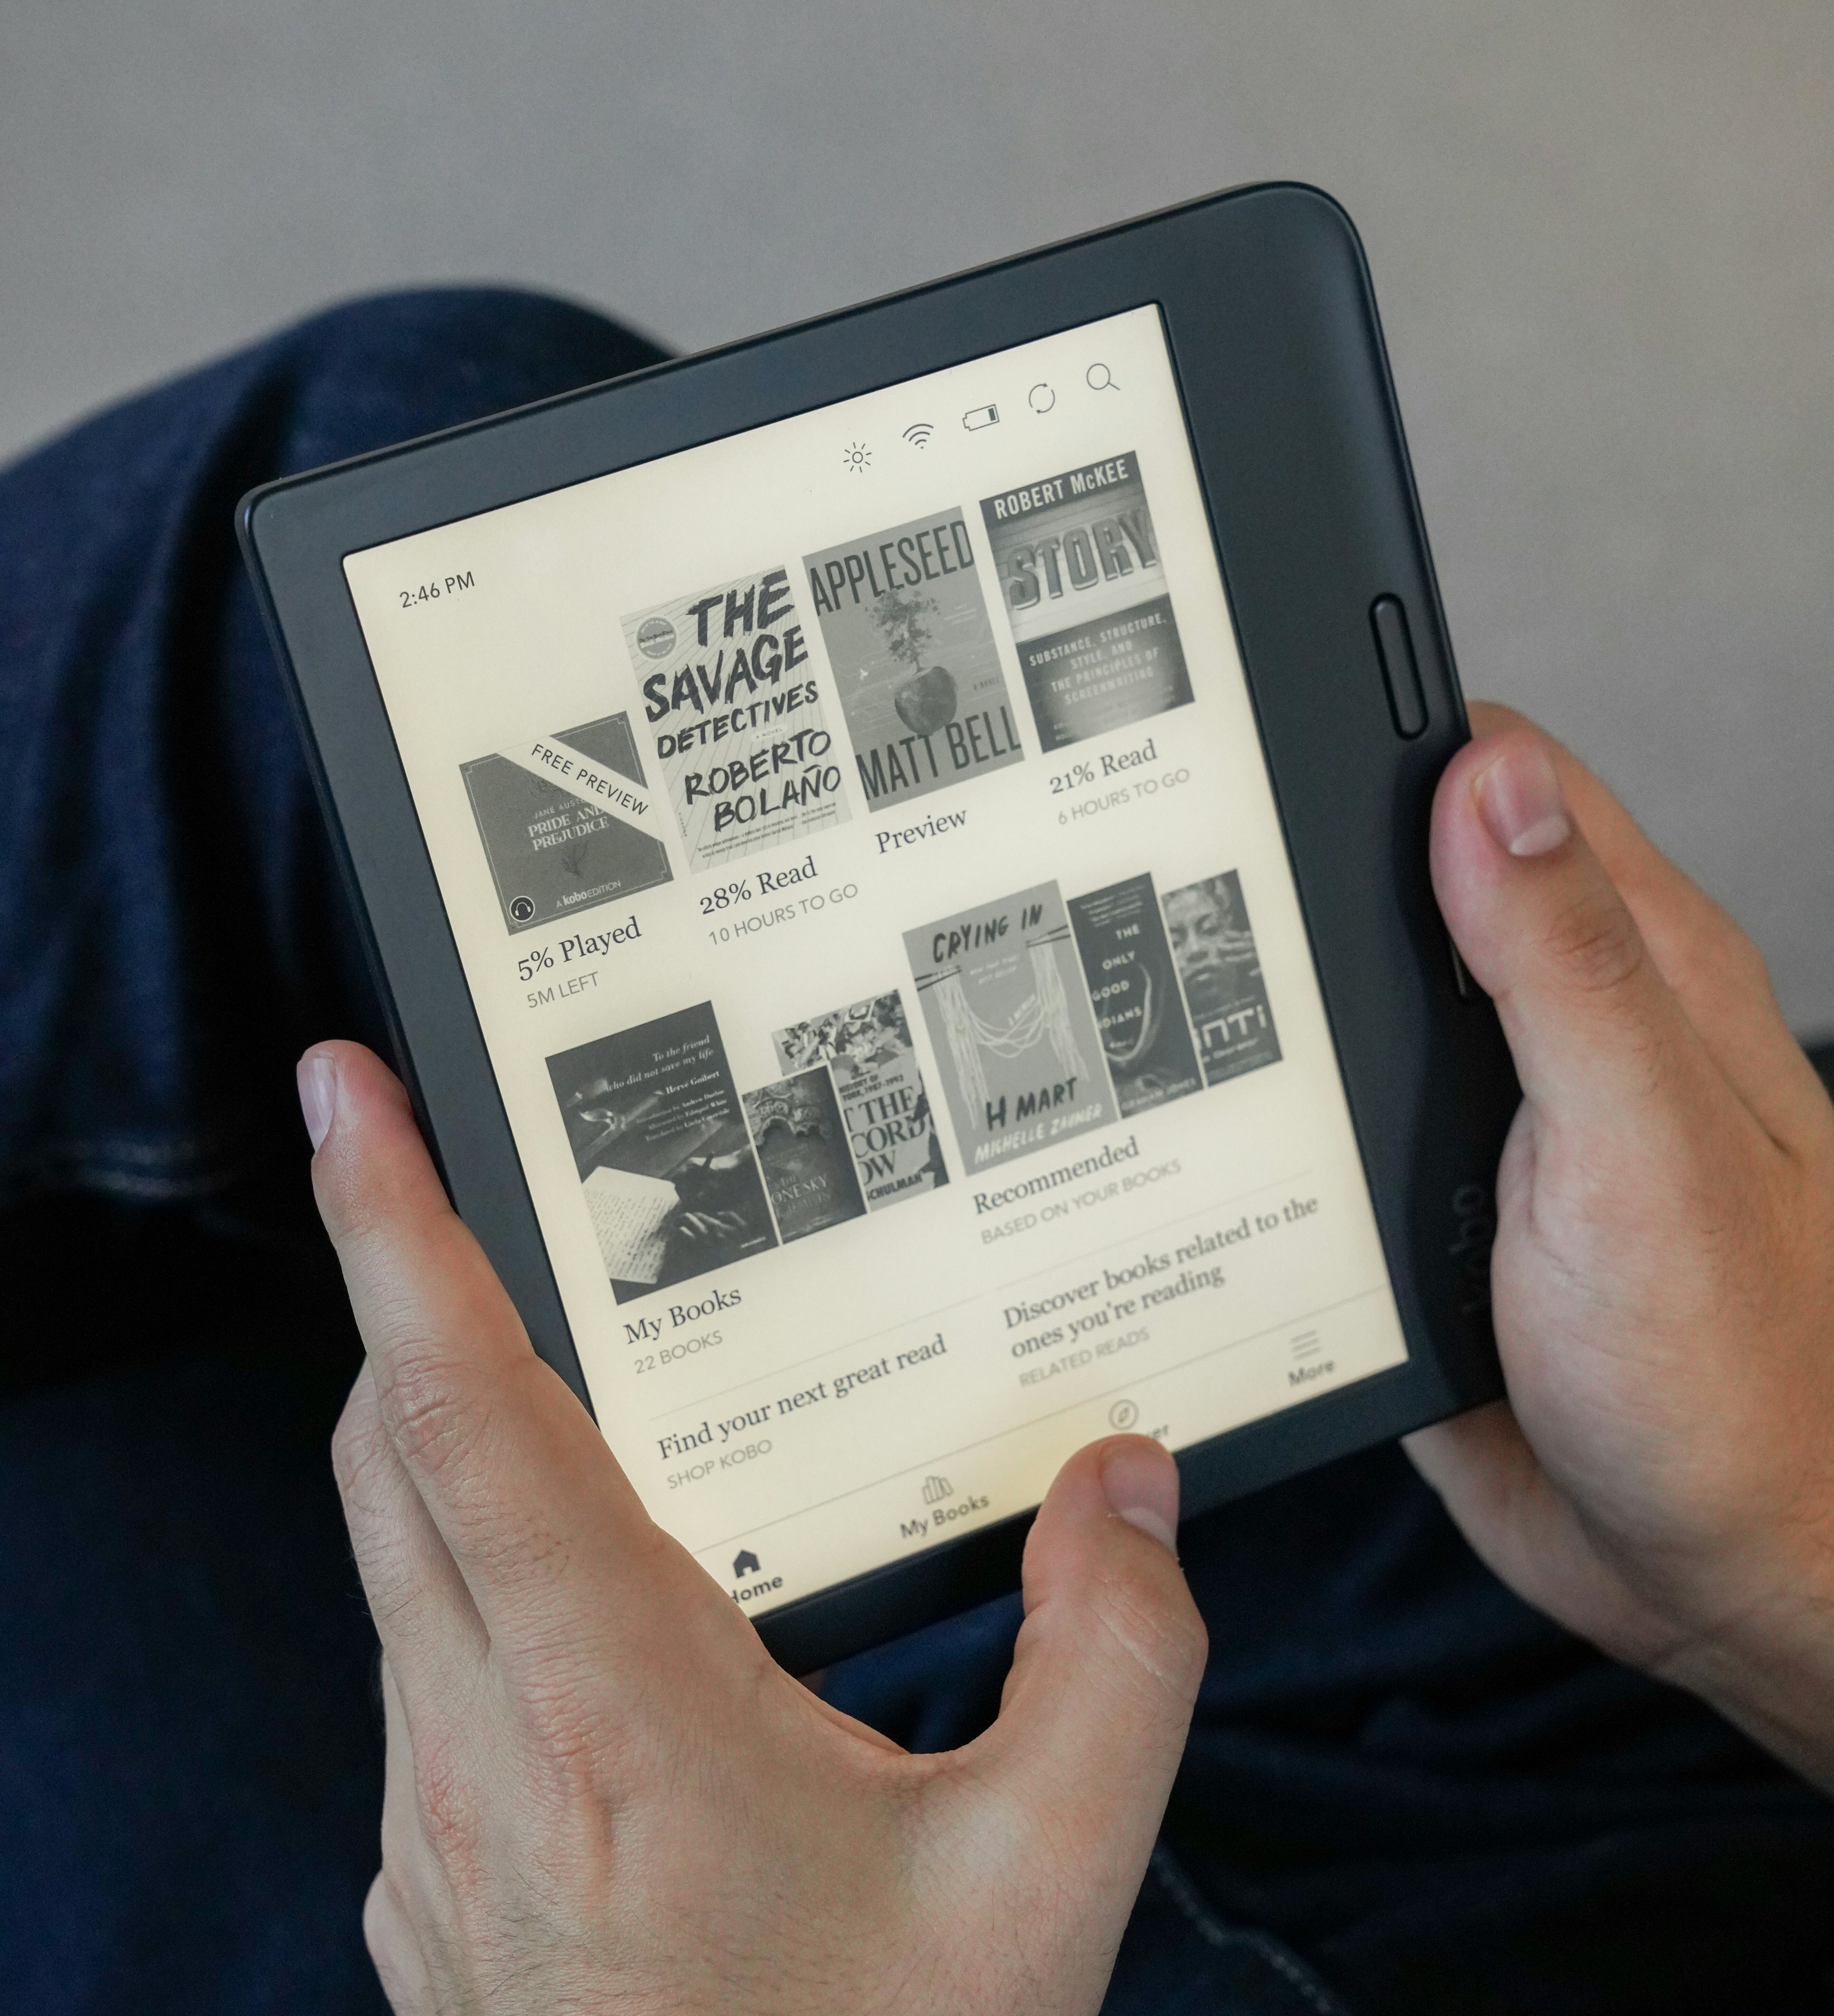 KOBO LIBRA 2 REVIEW, Gallery posted by sandyoxw